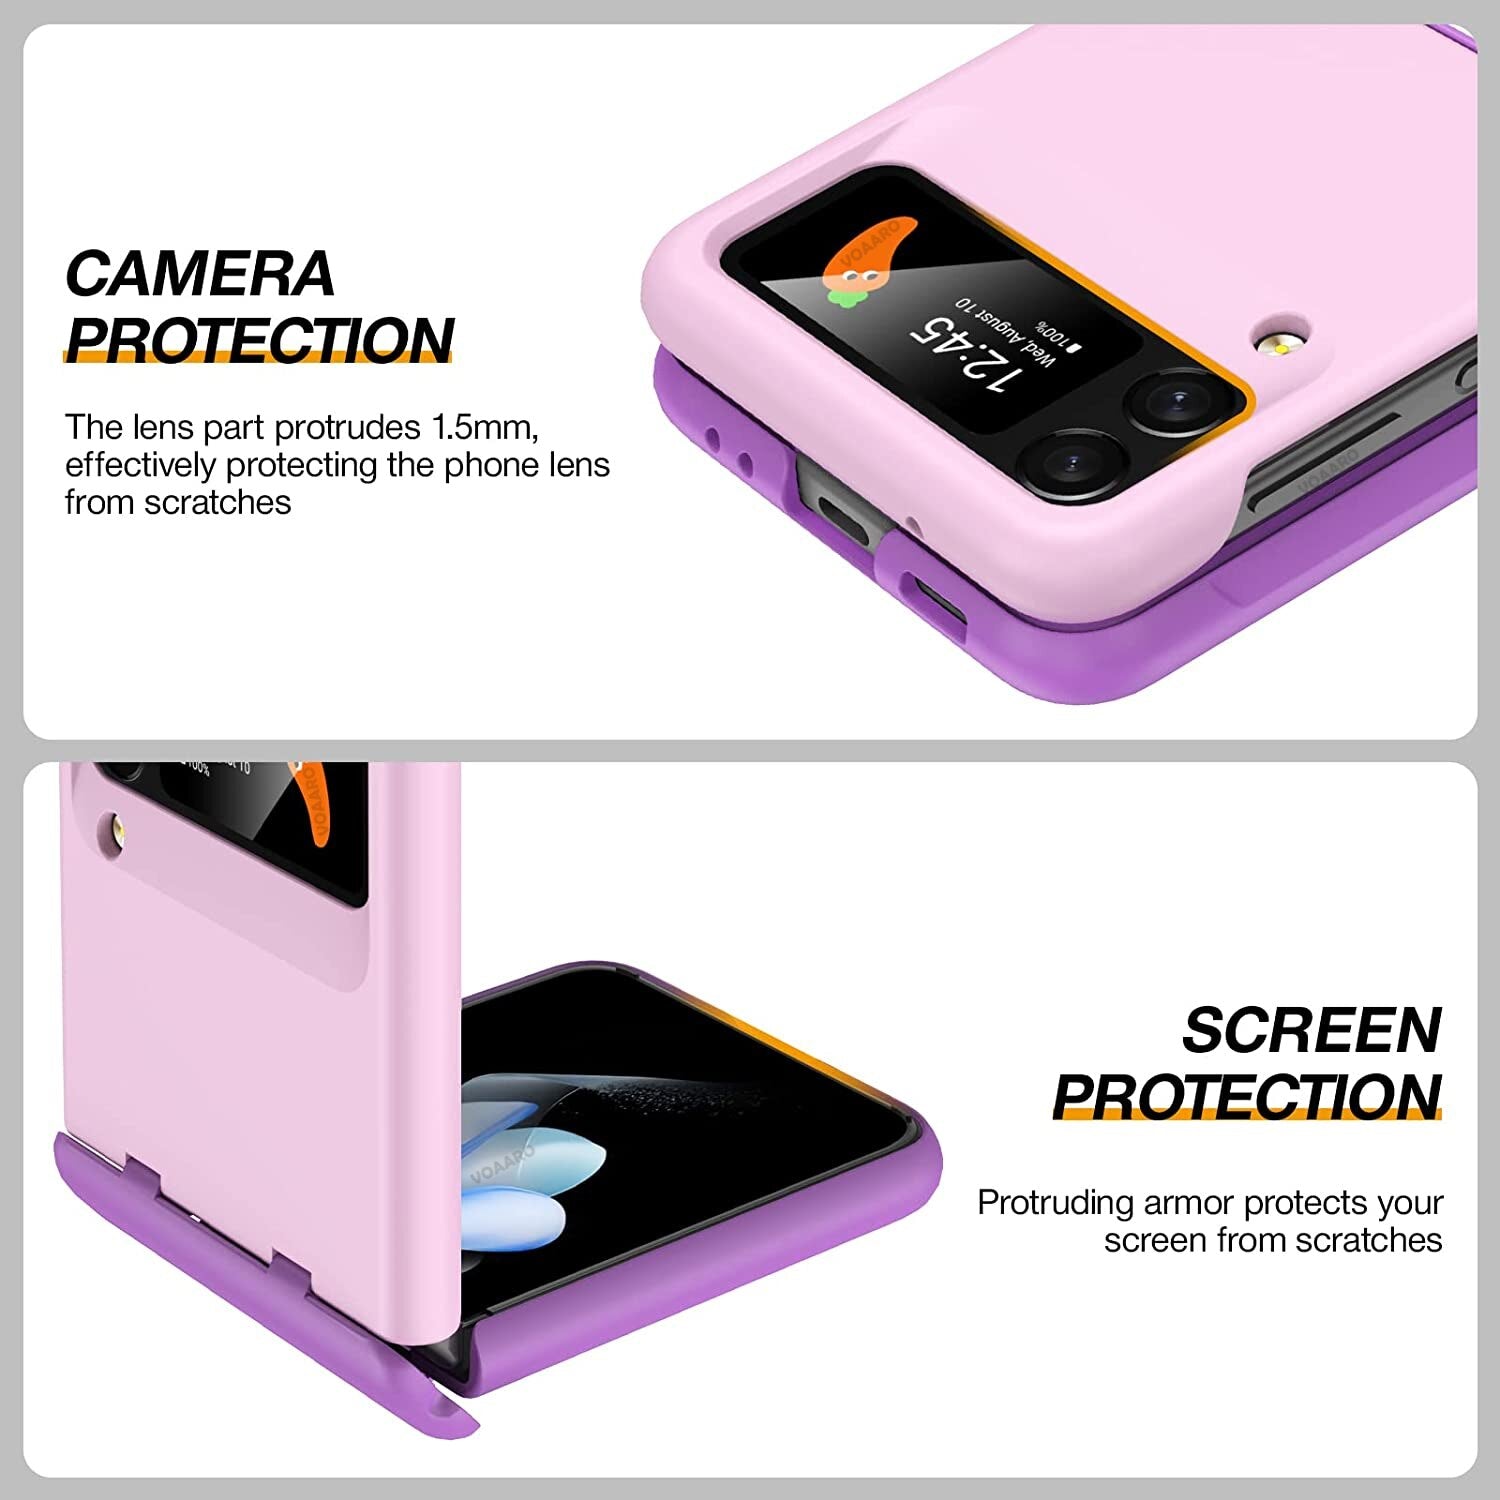 Case with Hinge Full Protection For Samsung Galaxy Z Flip 4 - Galaxy Z Flip 4 Case